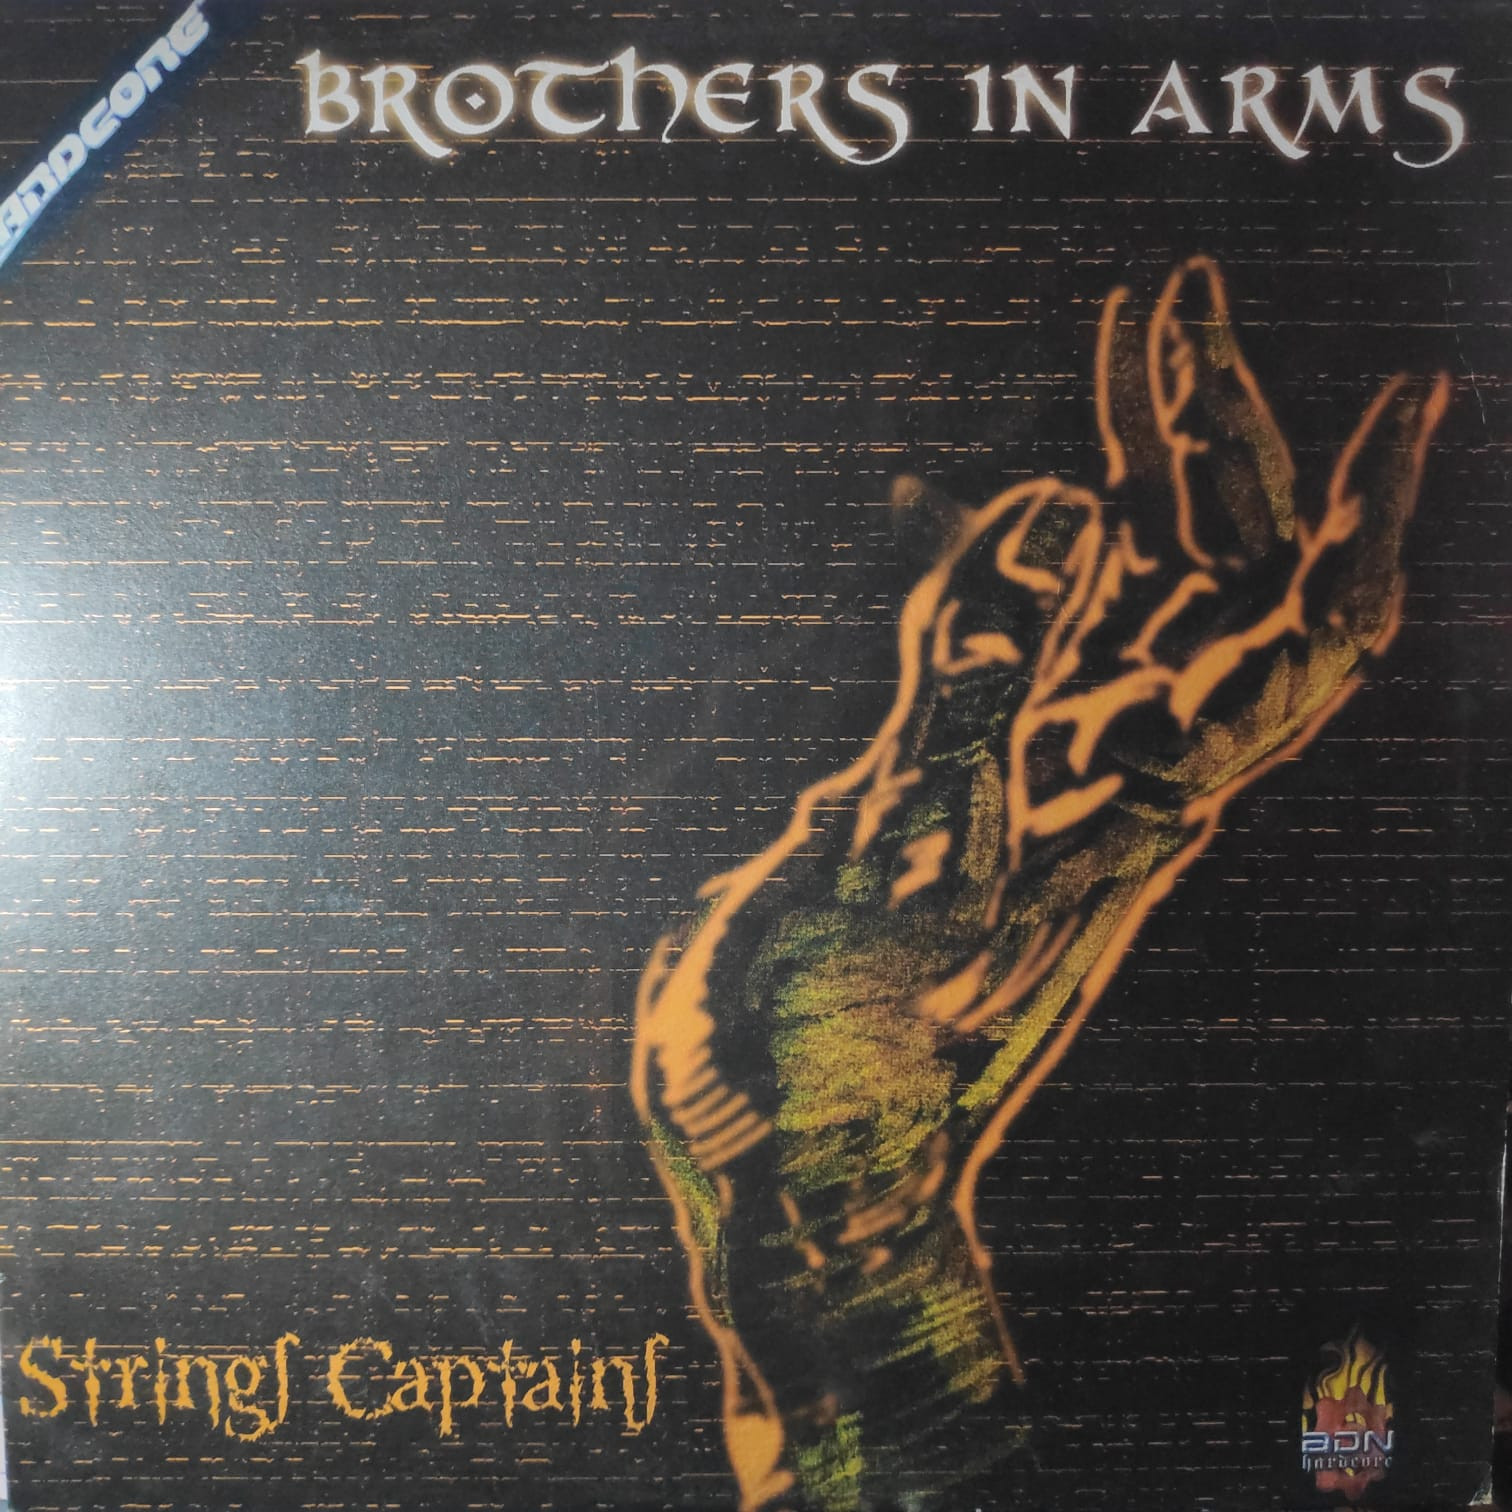 (CUB0996) Strings Captains ‎– Brothers In Arms